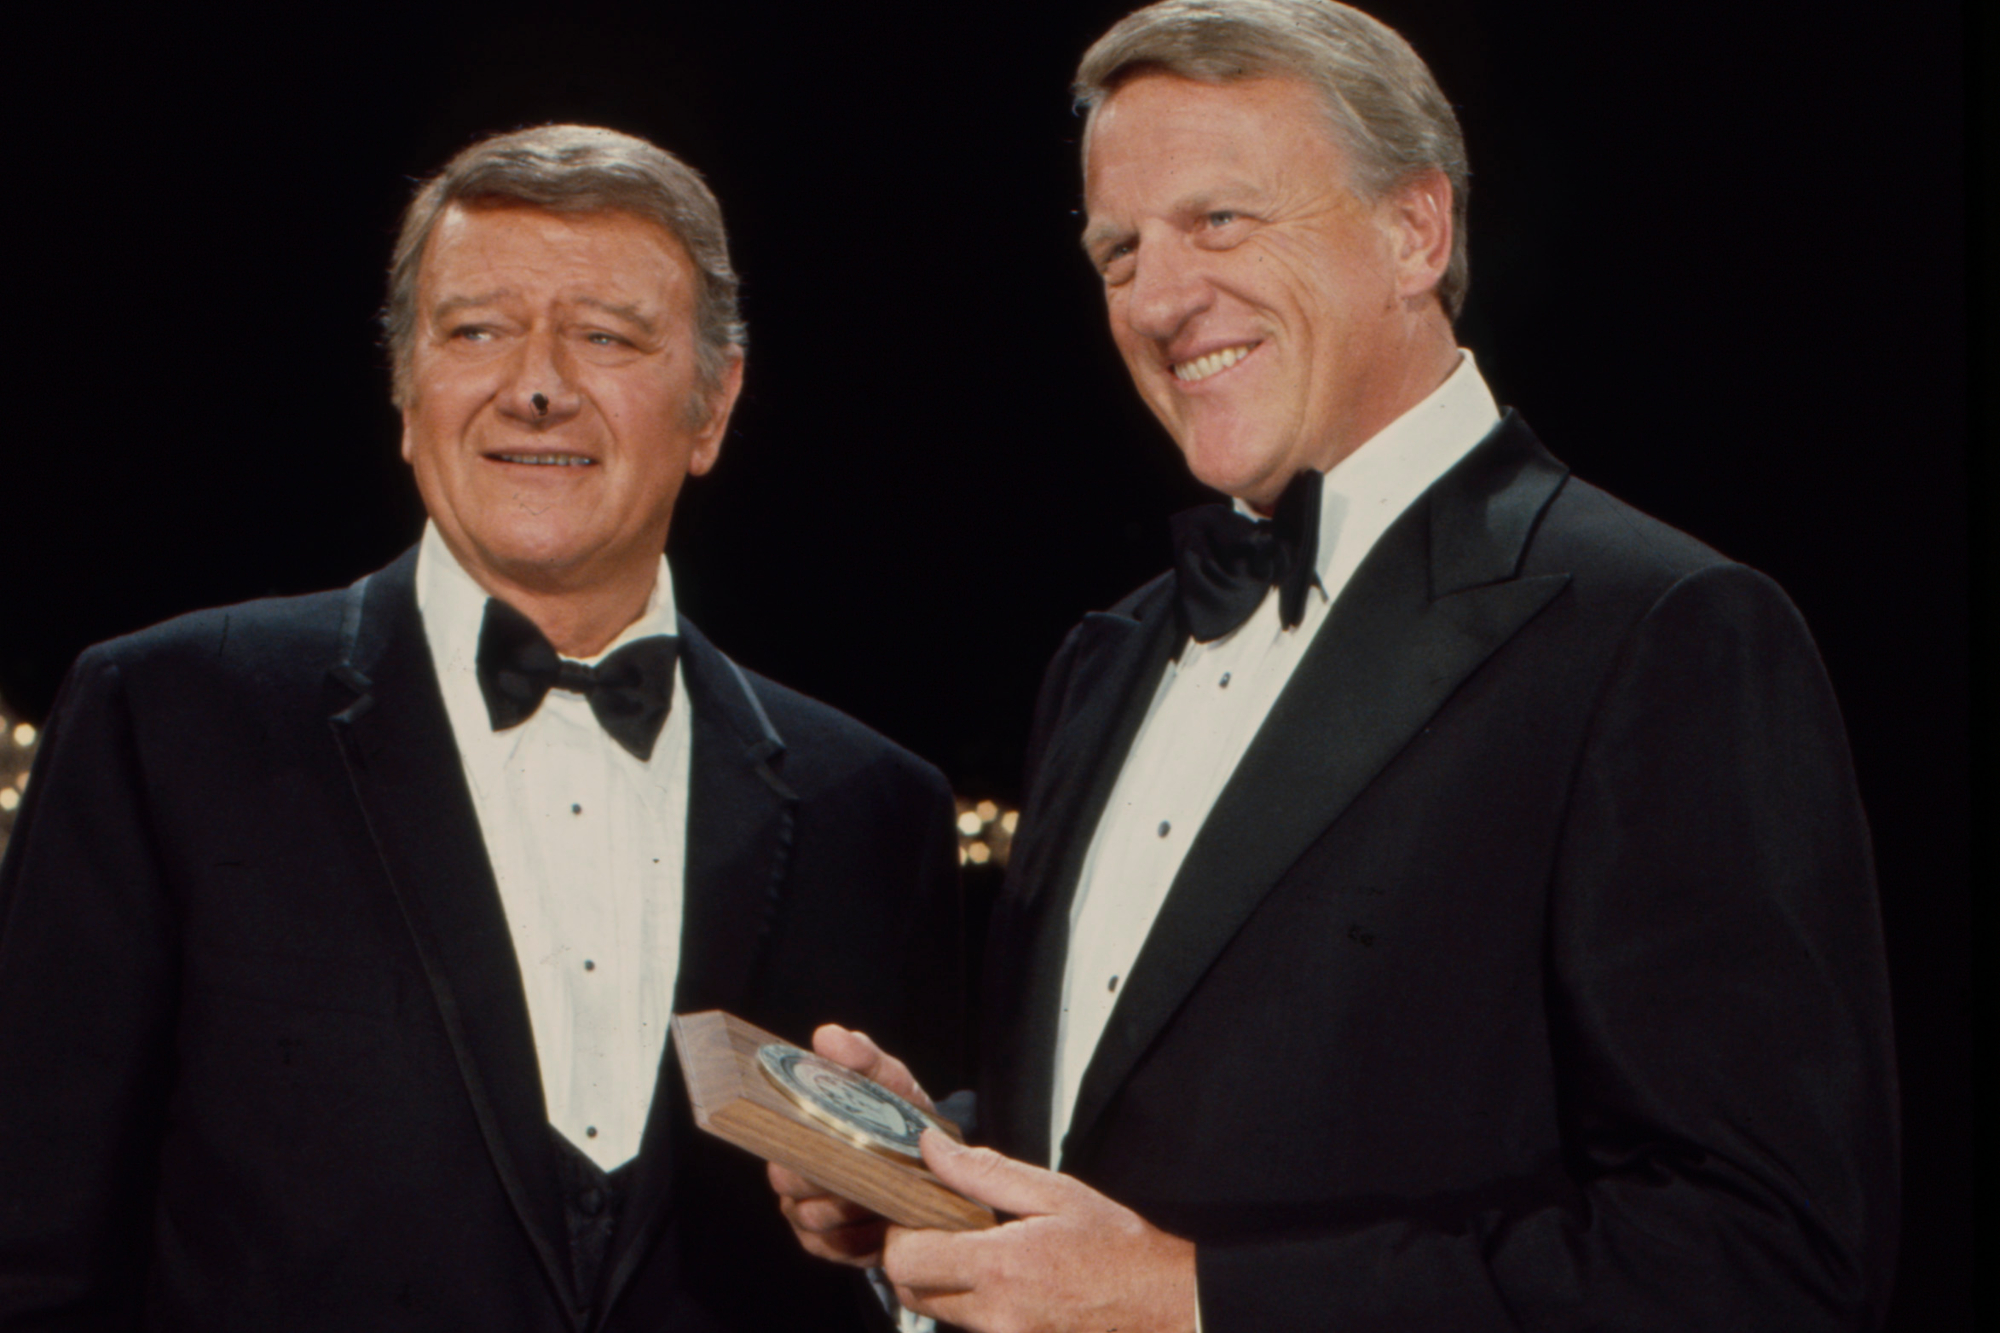 John Wayne and James Arness. They're smiling and wearing tuxes with Arness holding an award.